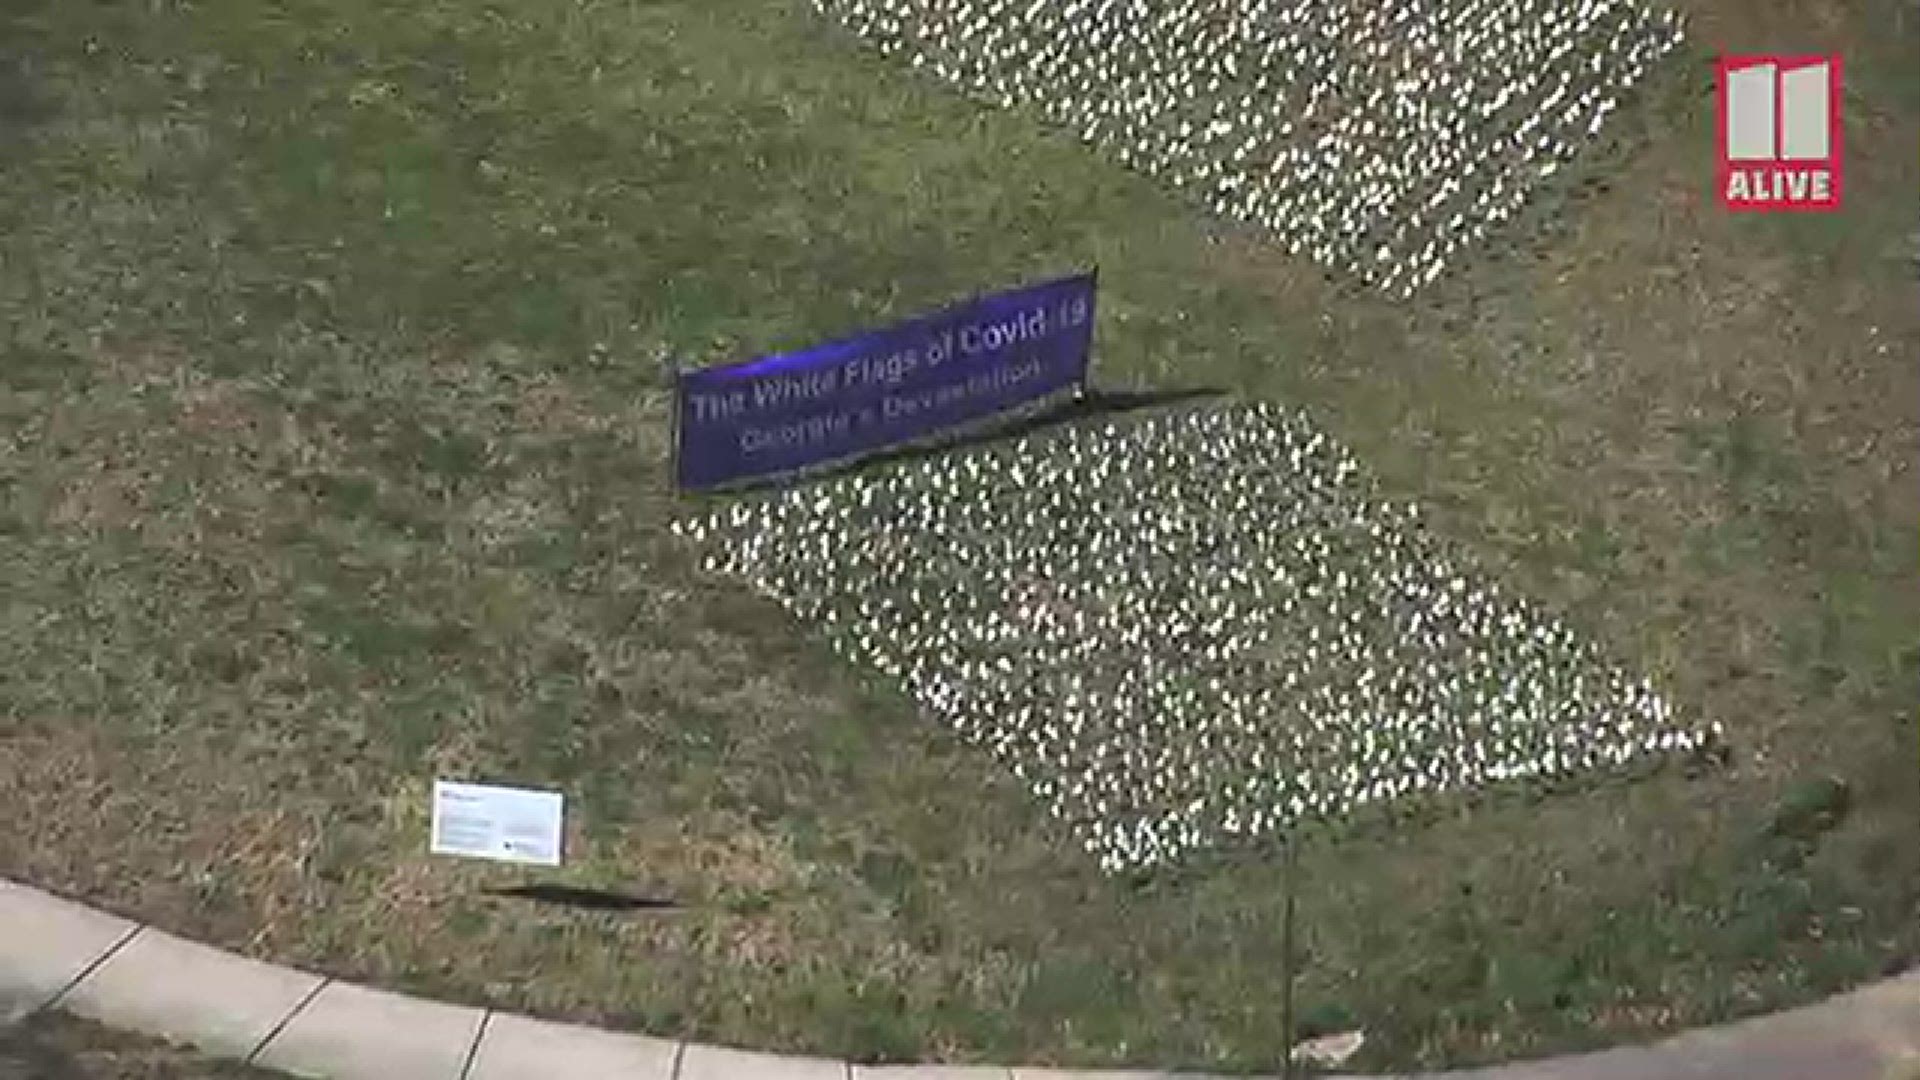 From Feb. 21-28, 15,000 white flags will be displayed on the lawn of First Christian Church of Decatur in memory of those who have died in Georgia from COVID-19.